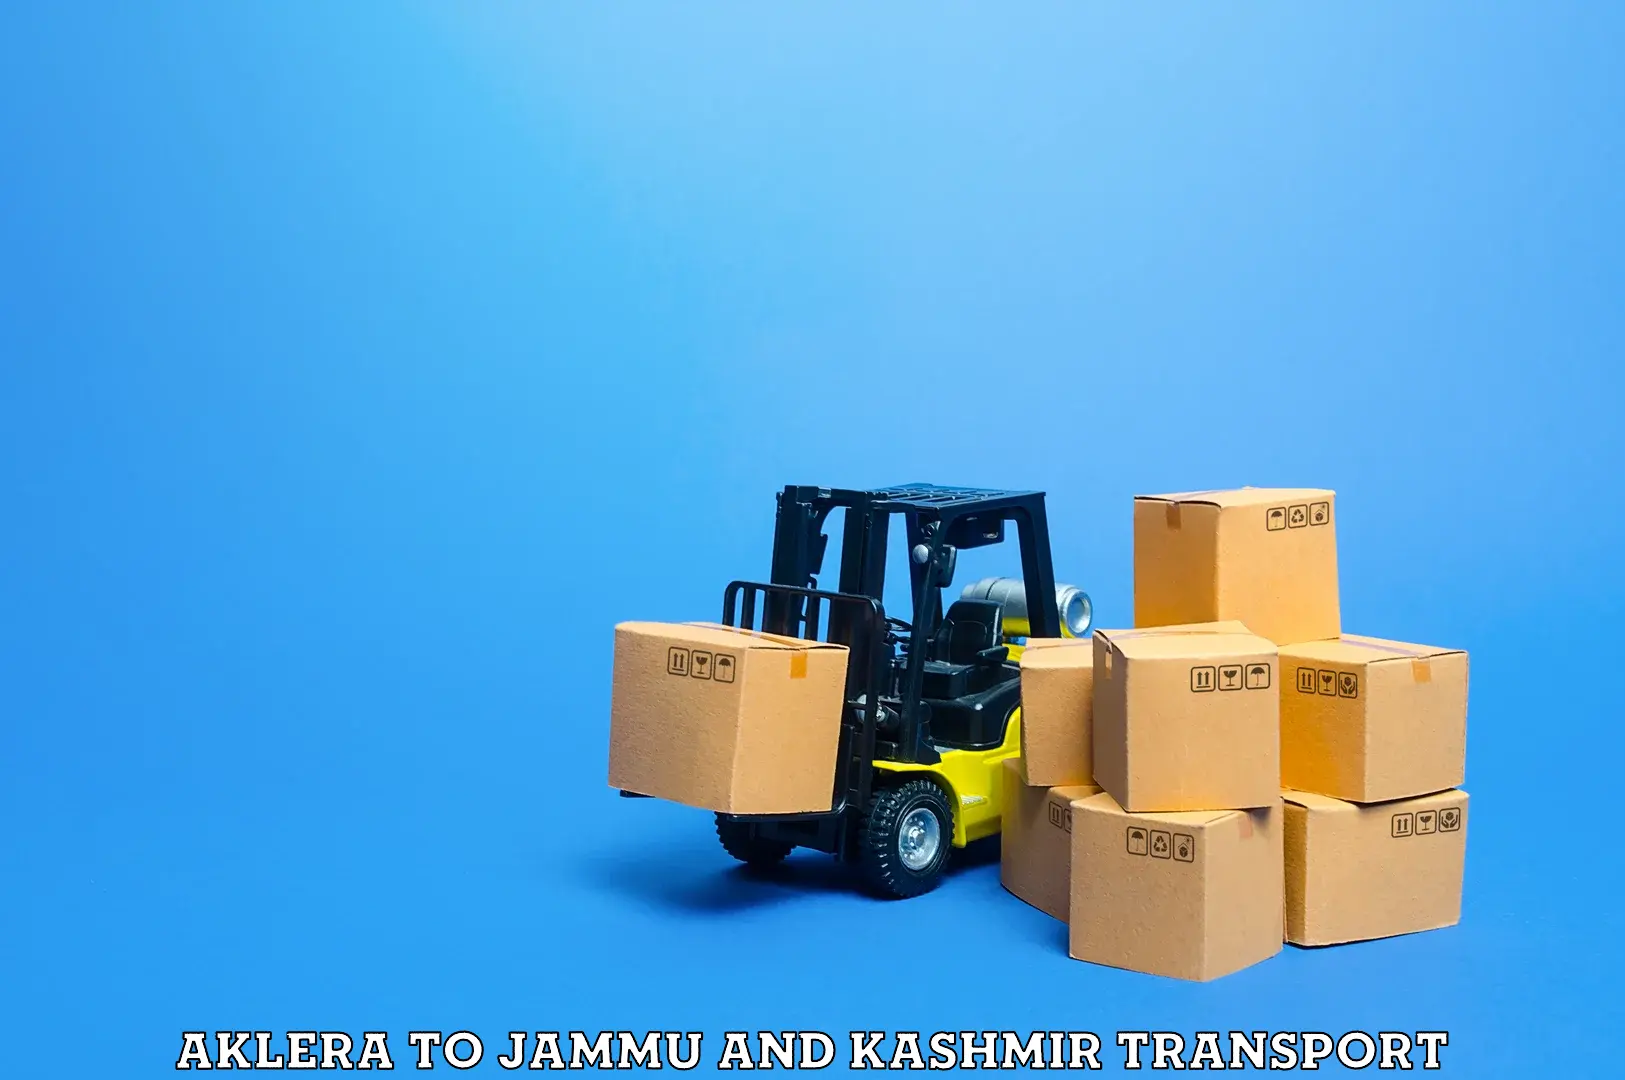 Container transport service Aklera to Jammu and Kashmir